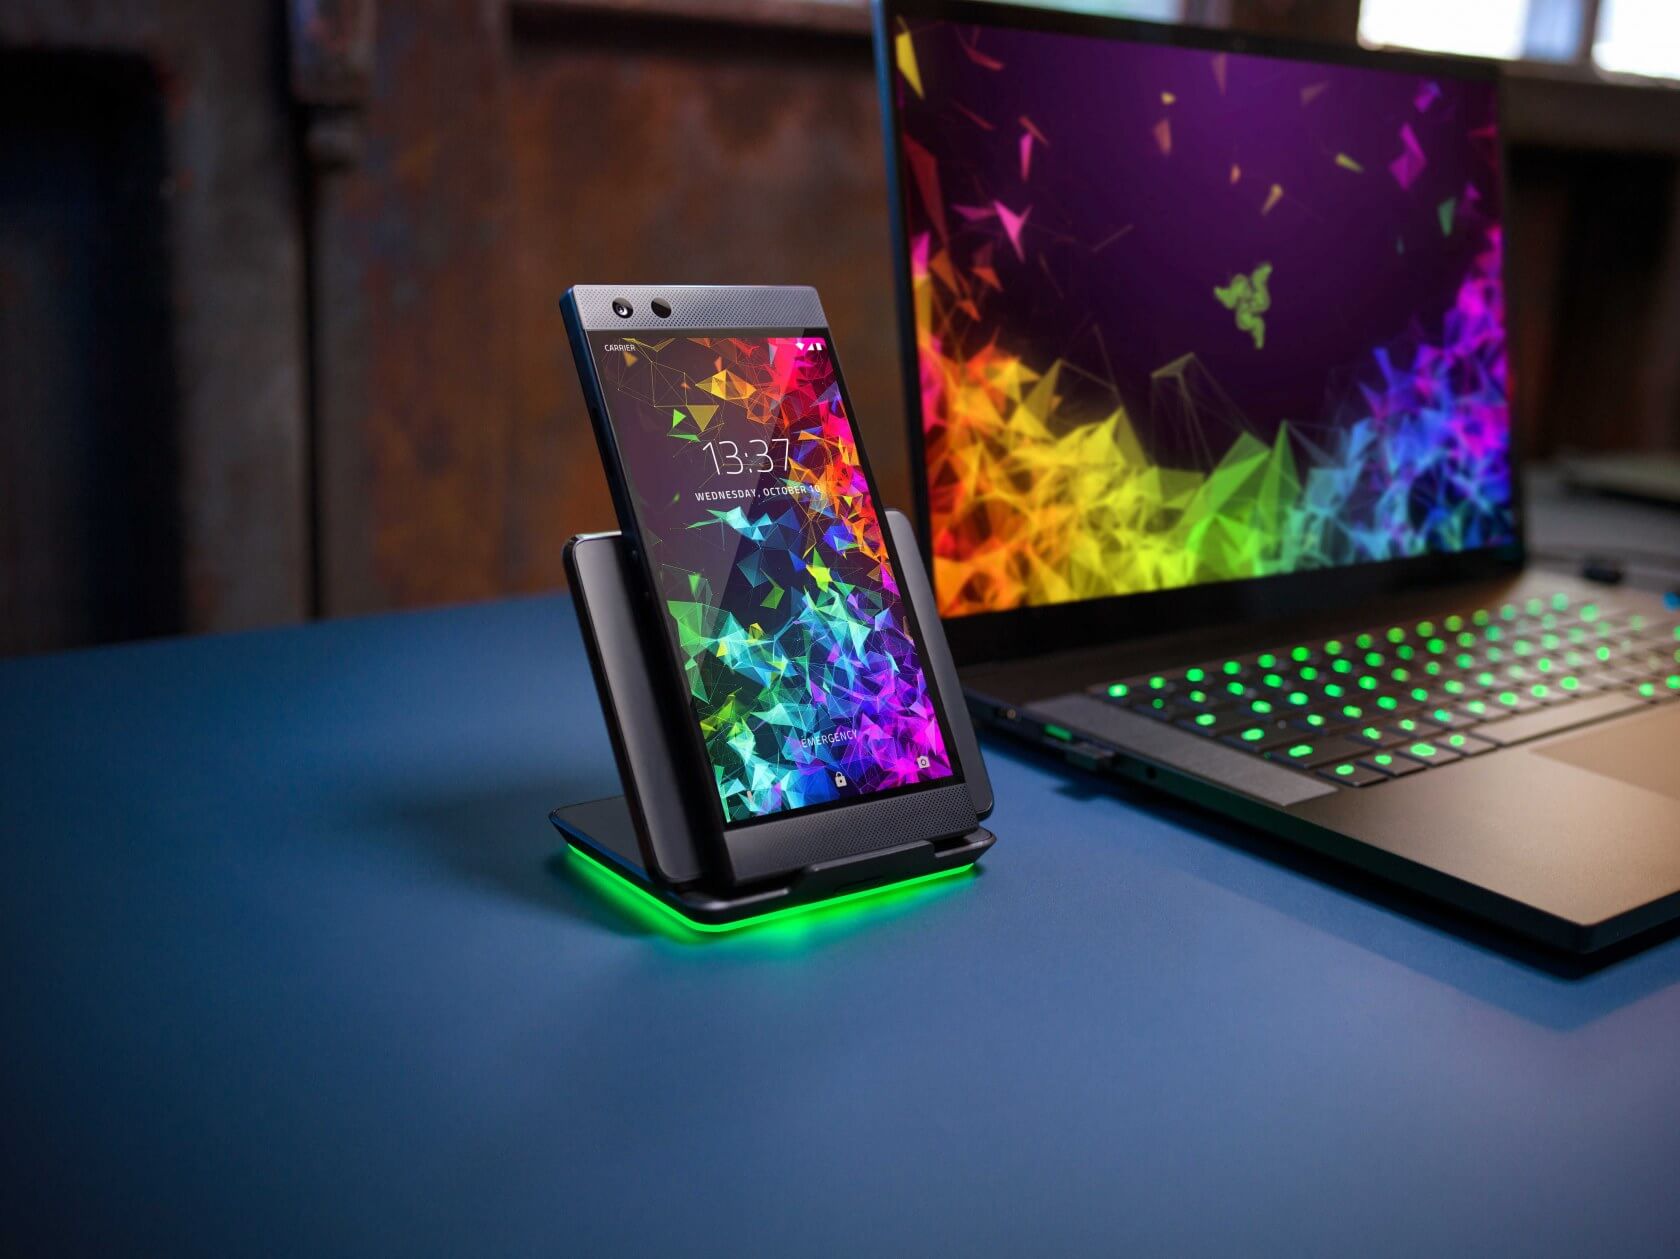 AT&T will begin selling the Razer Phone 2 on November 16 as the device's exclusive US carrier